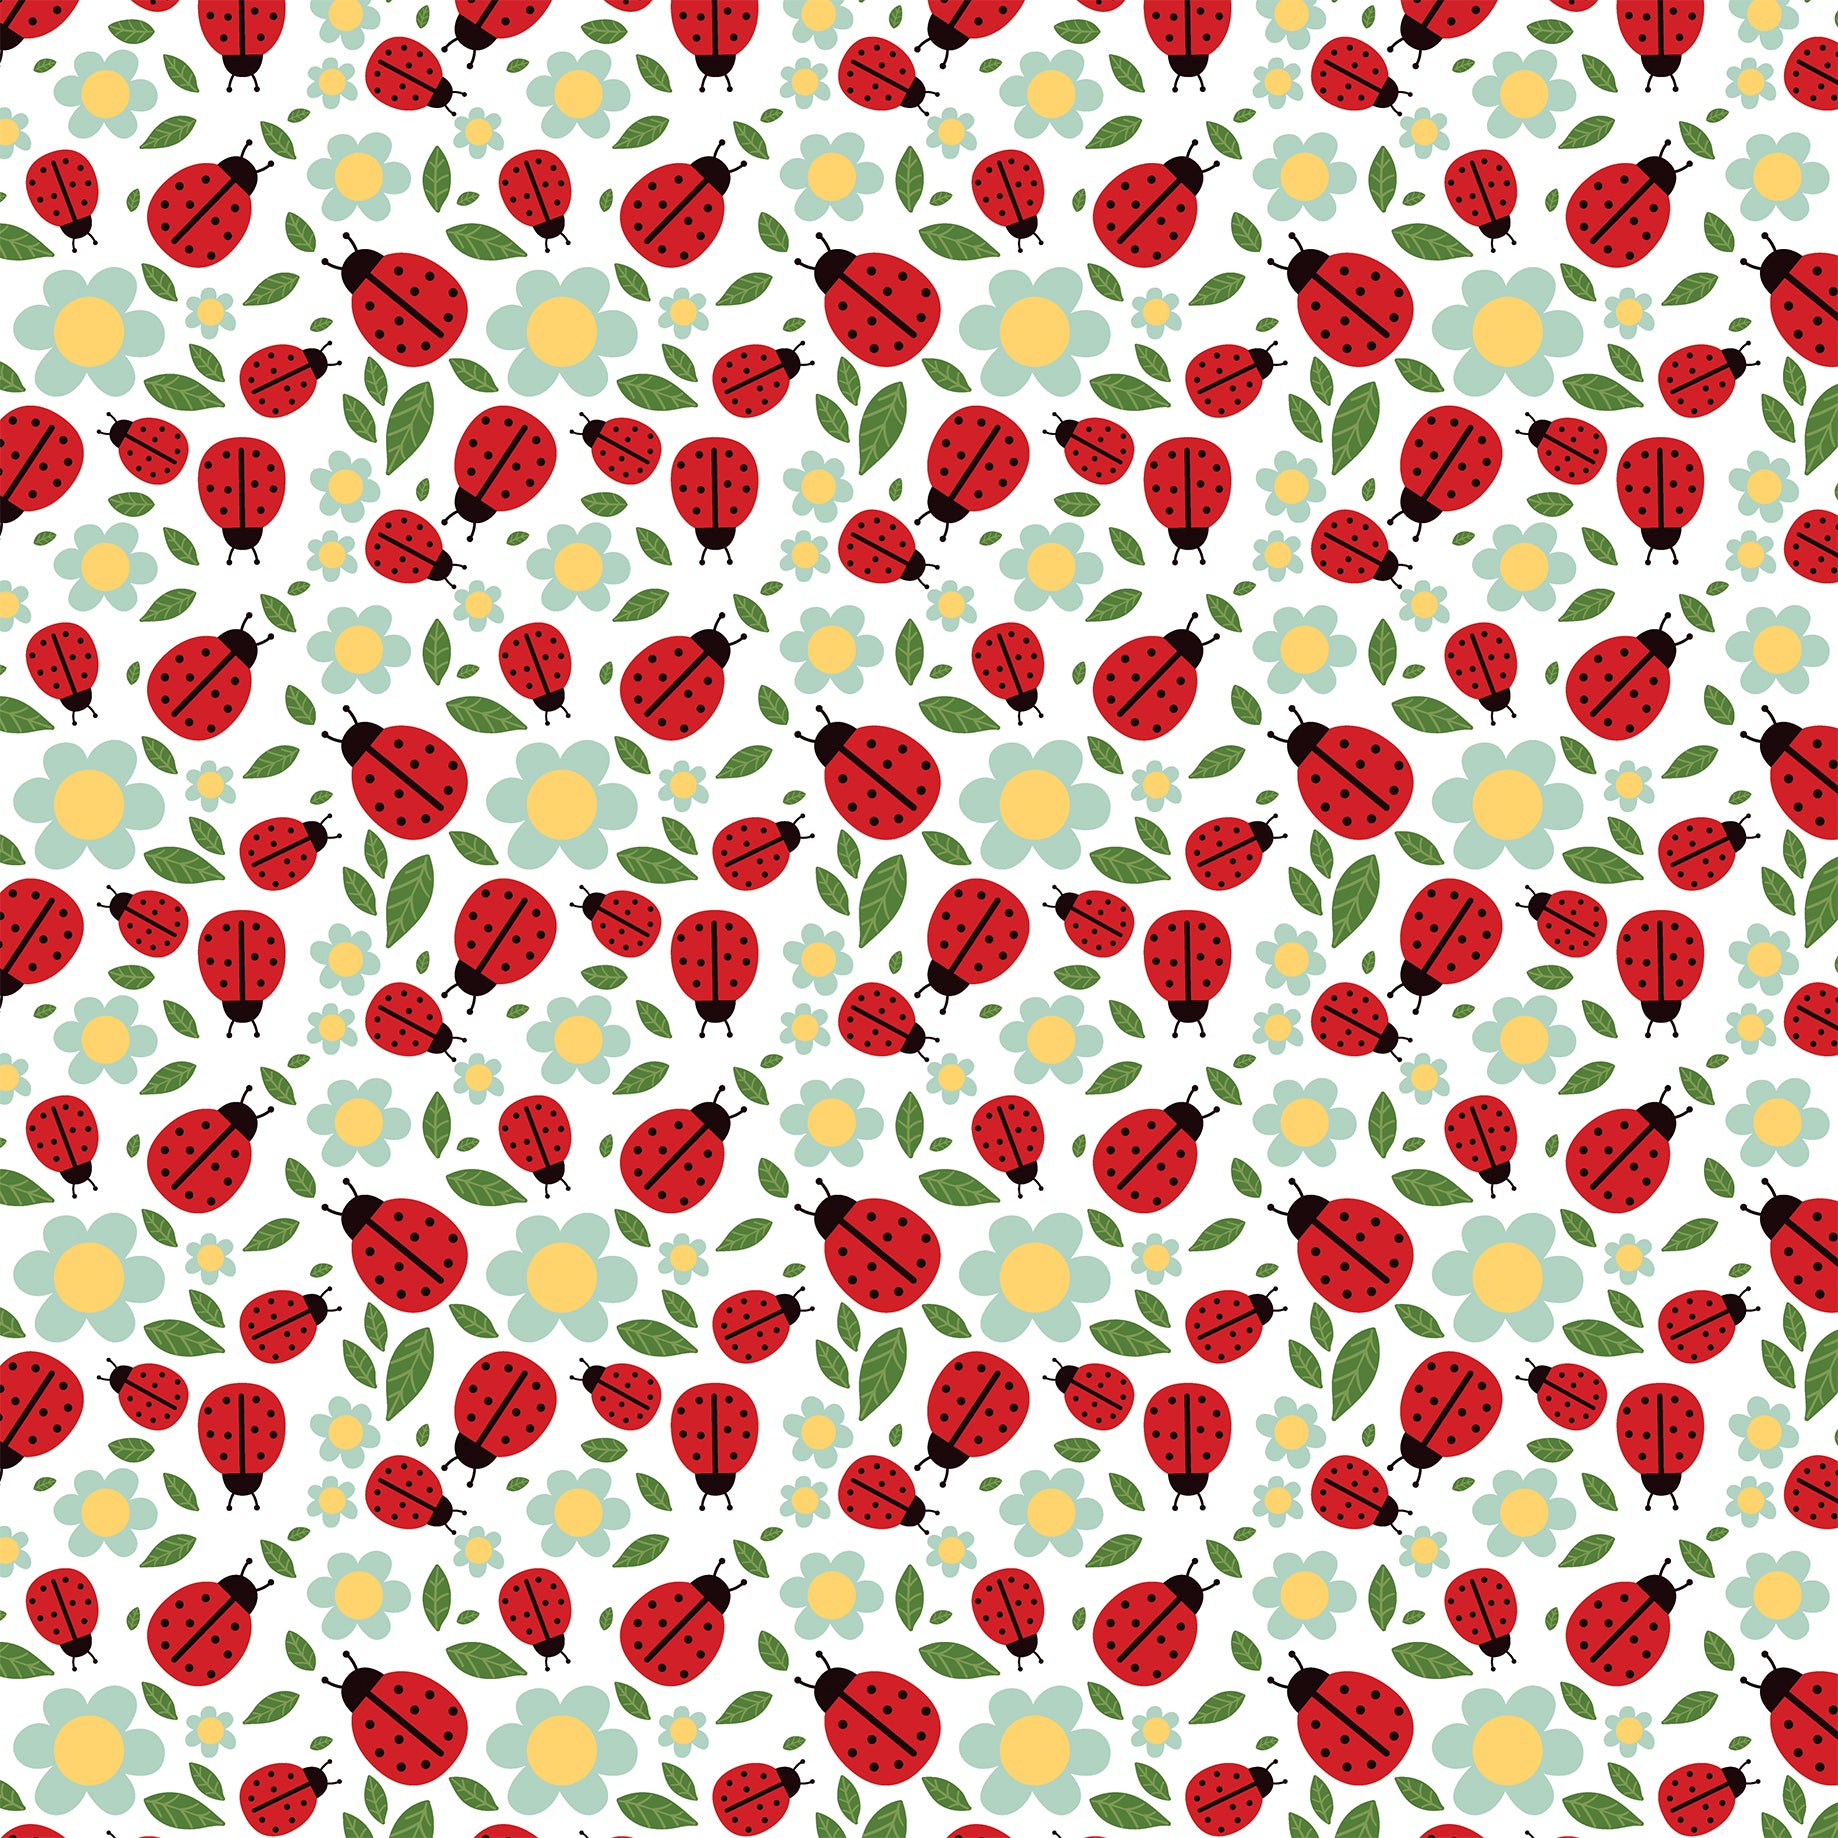 Little Ladybug Collection Cute As A Bug 12 x 12 Double-Sided Scrapbook Paper by Echo Park Paper